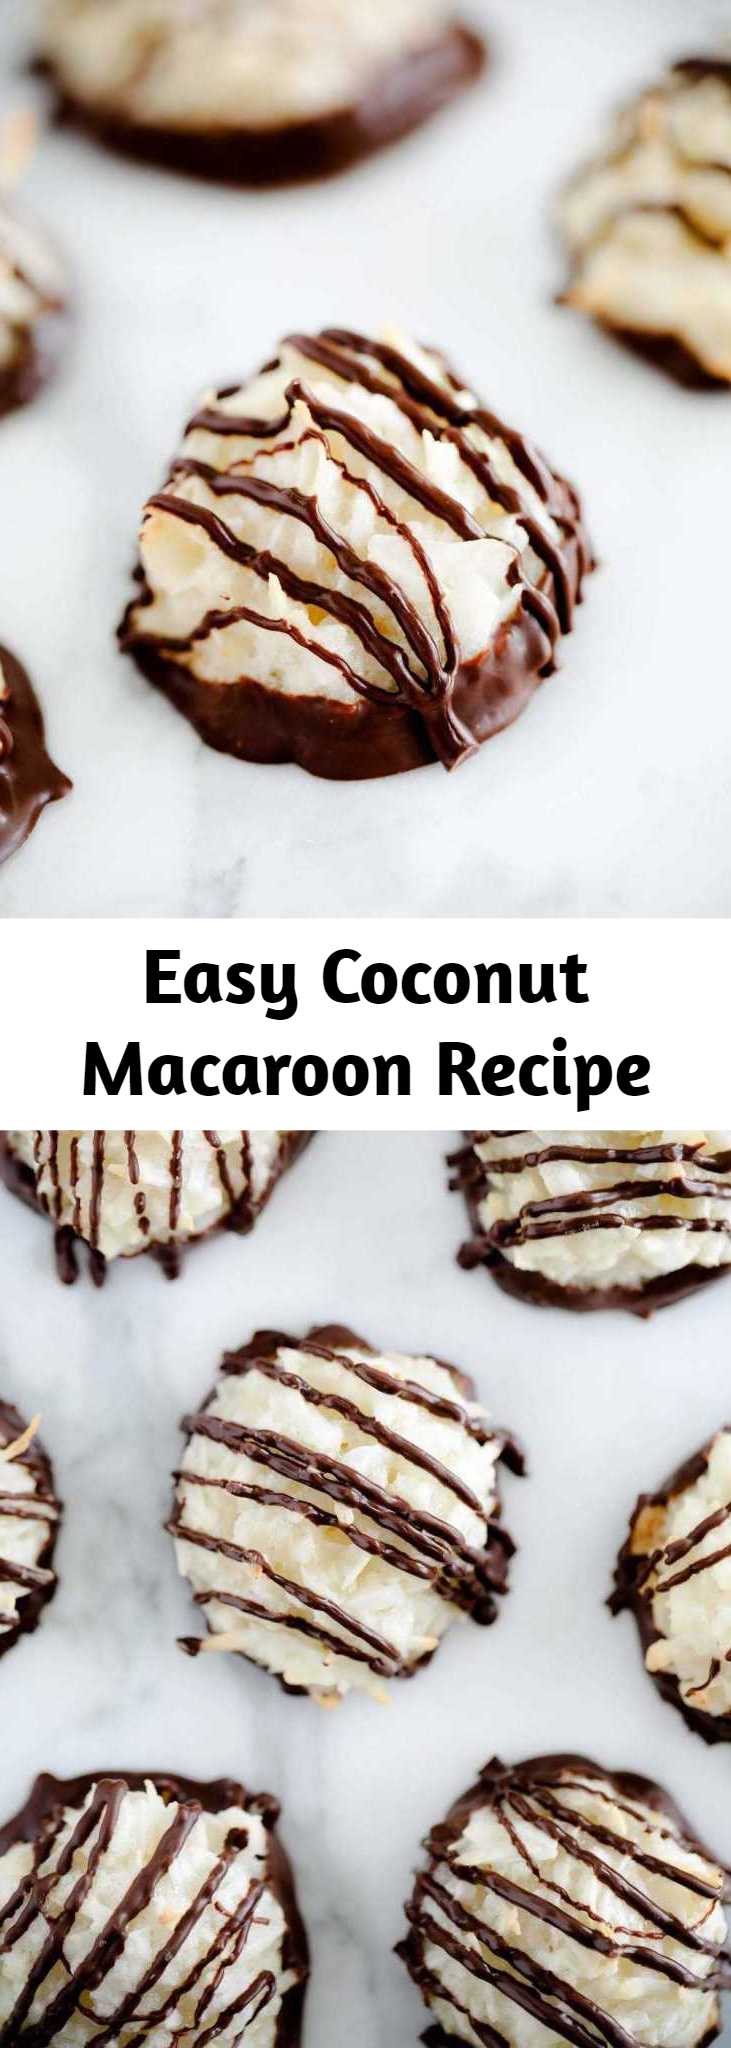 Easy Coconut Macaroons - Soft, chewy and full of coconut flavor. So simple to make…you only need 6 ingredients and one bowl! You can make them plain or dip them in chocolate for an added touch!